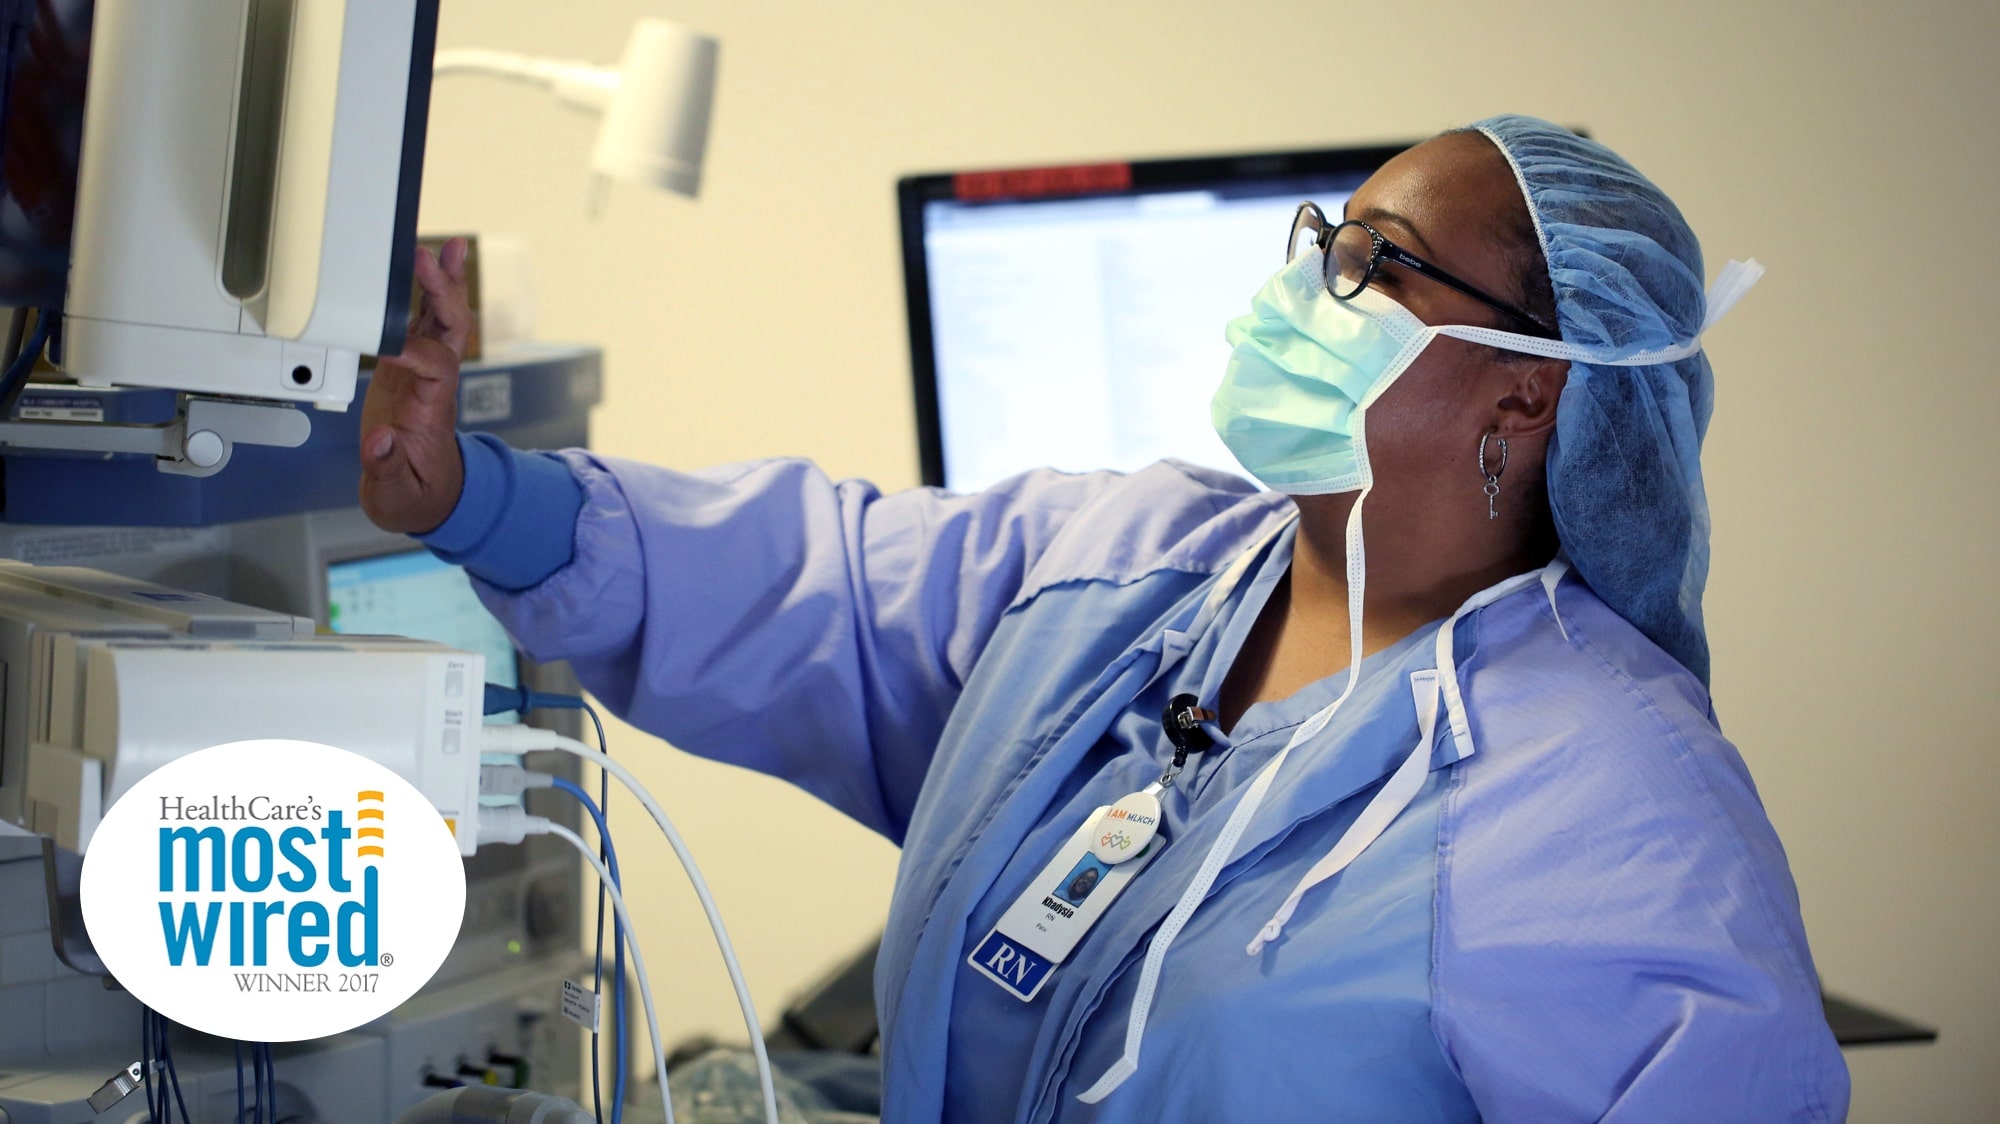 Black female nurse in blue scrubs using medical equipment with logo that reads HealthCare's most wired winner 2017